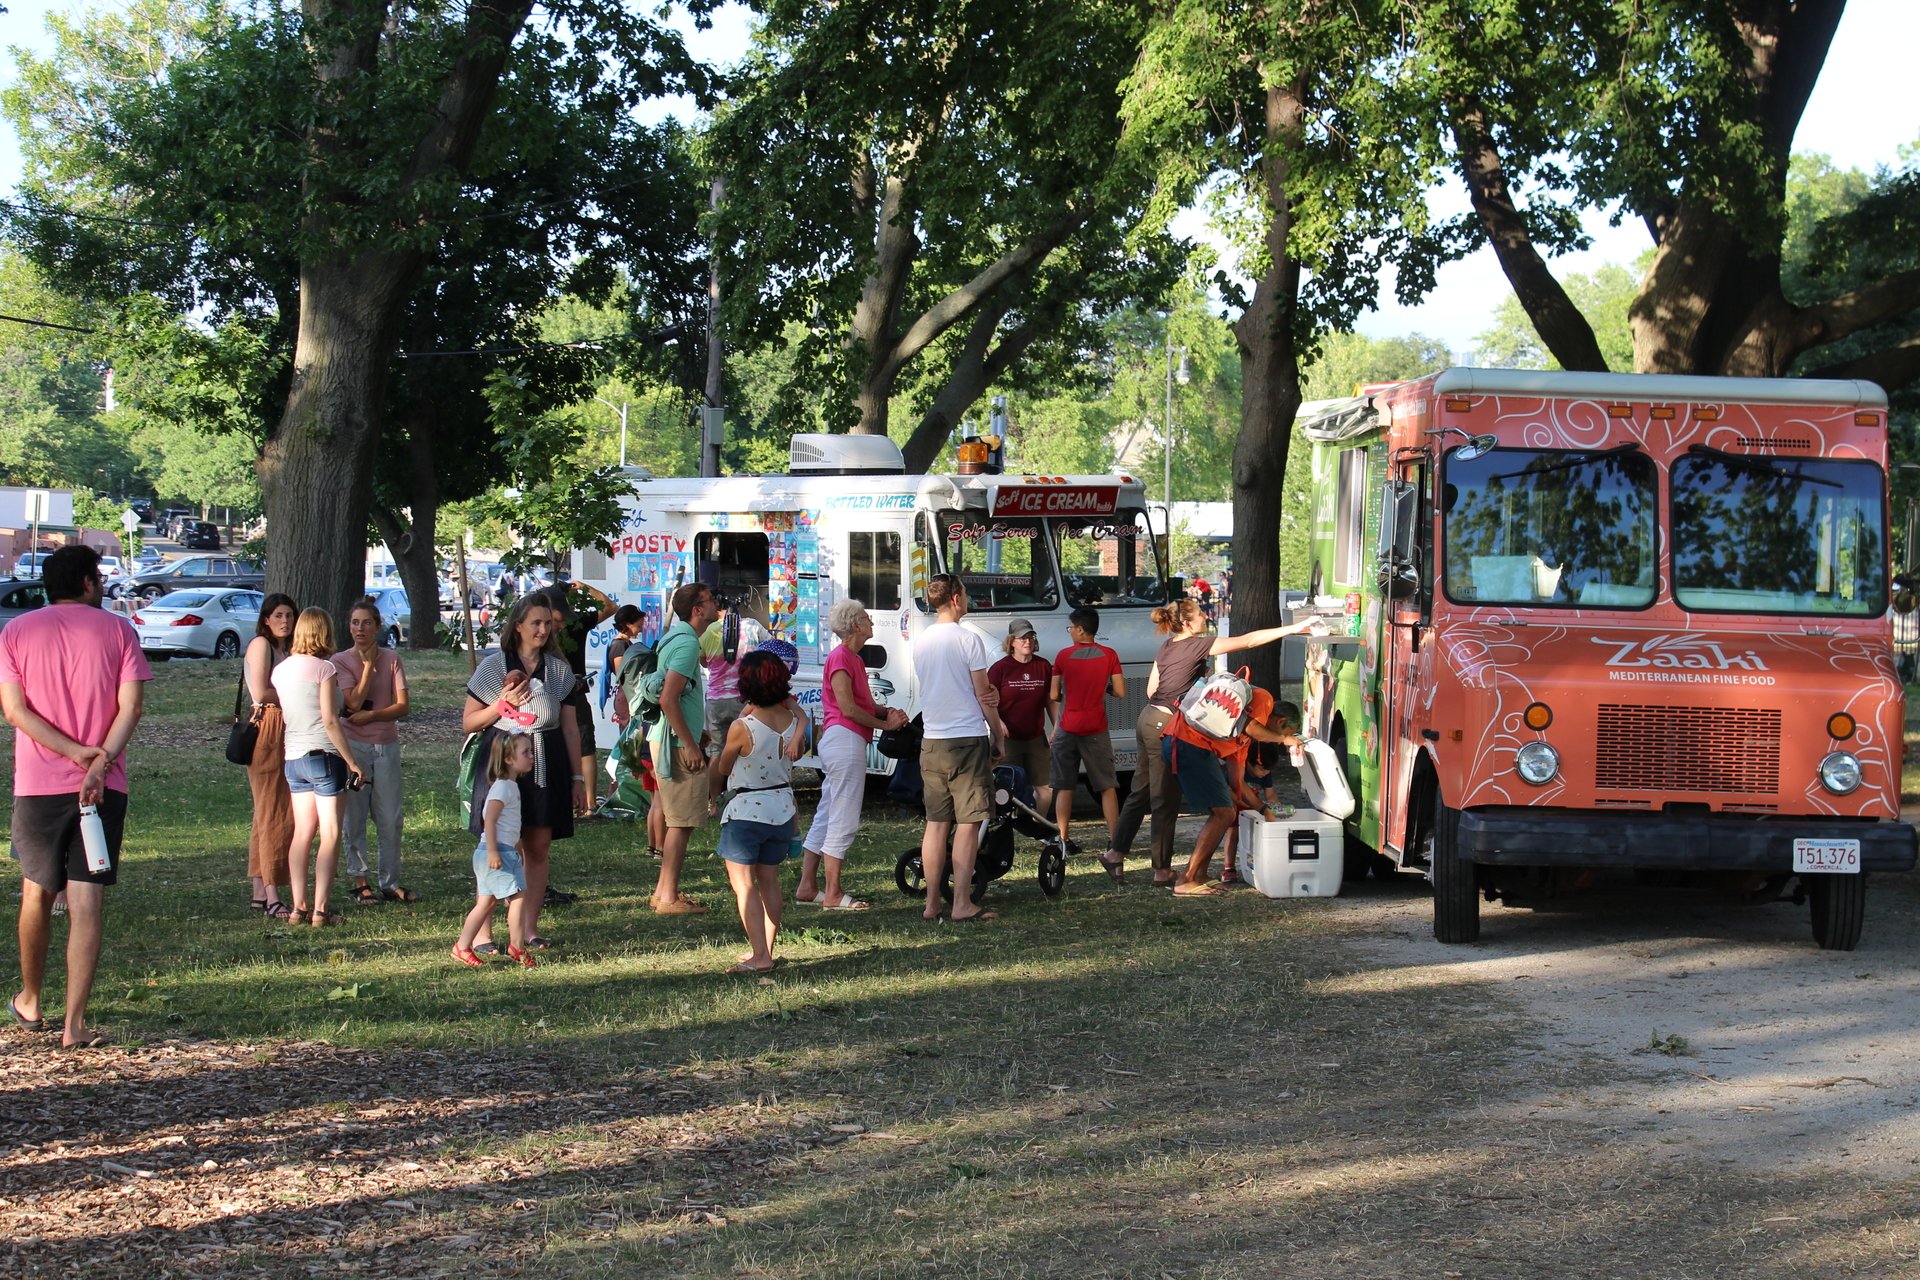 Two food trucks, one white and one orange, parked in the grass with lines of people waiting to order.